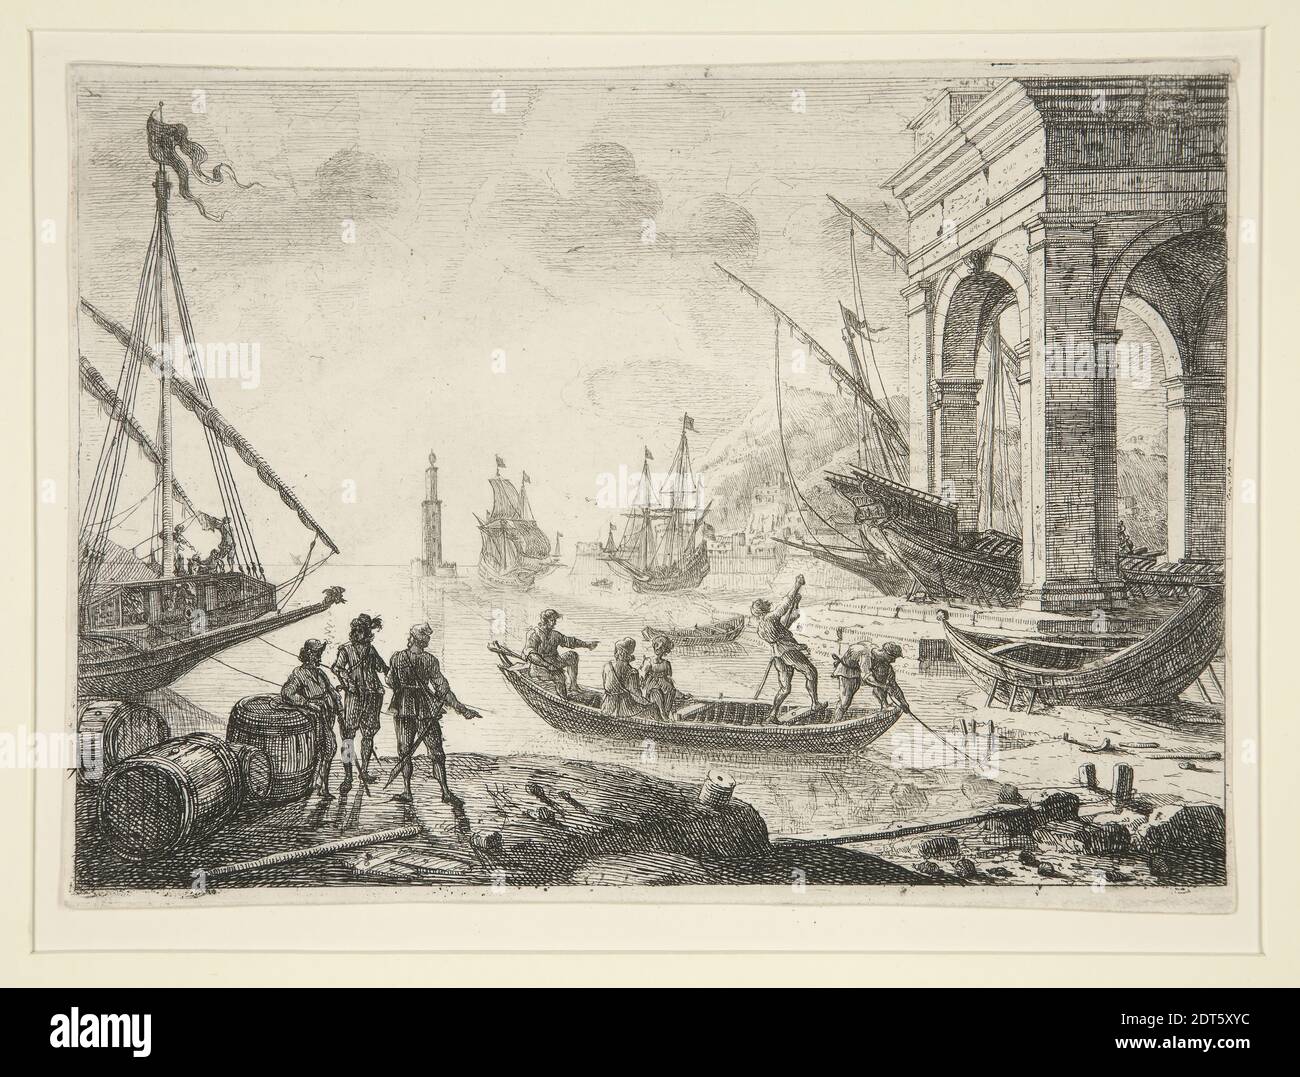 Artist: Claude Gellée, called Claude Lorrain, French, active Rome, 1604–1682, Port de Mer au Fanal, Etching, sheet: 14.2 × 19.8 cm (5 9/16 × 7 13/16 in.), Made in France, French, 17th century, Works on Paper - Prints Stock Photo